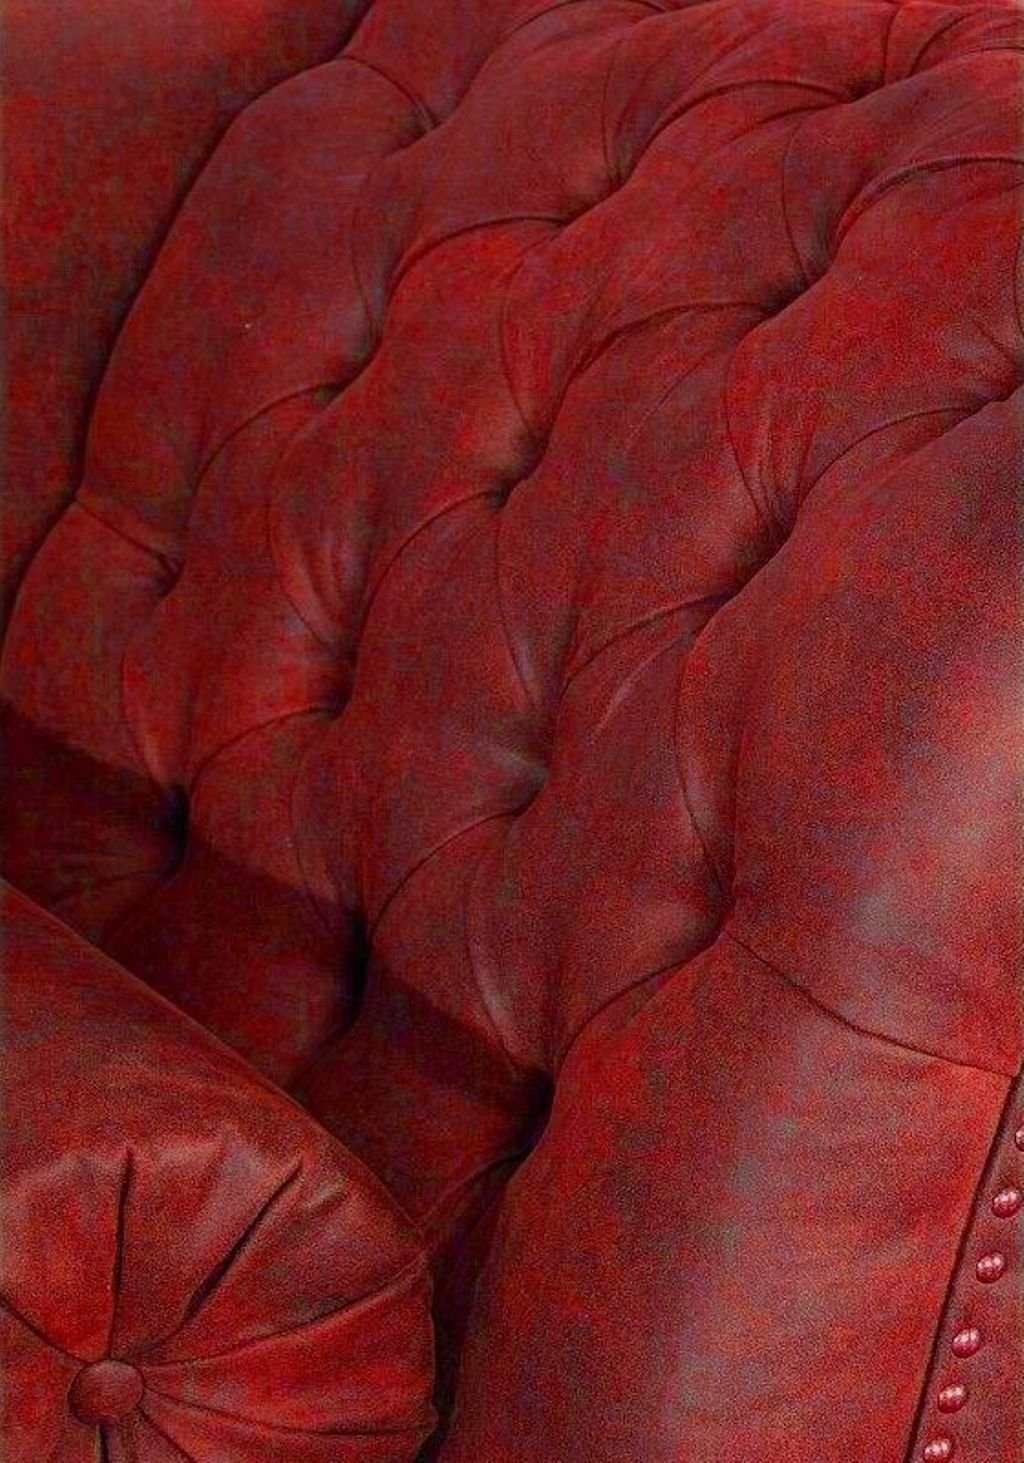 JVmoebel Chaiselongue in Textil Europa Sofa Chaise SOFORT, Rot Liege Teile, Made Chesterfield Relax 1 Chaiselongues